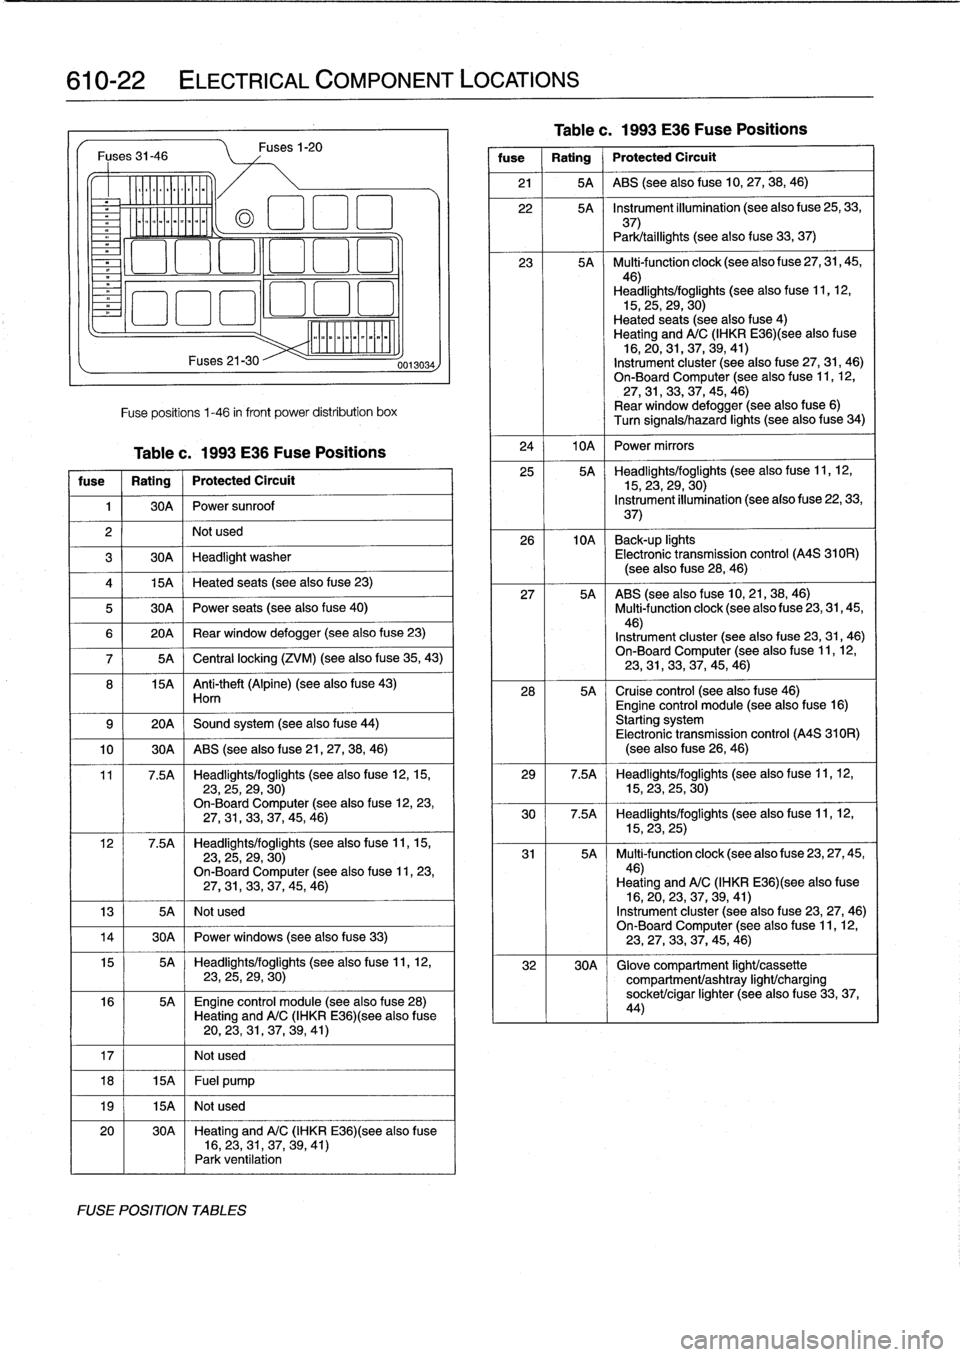 BMW 318i 1992 E36 Workshop Manual 
610-22

	

ELECTRICAL
COMPONENT
LOCATIONS

Fuses
31-46

Ylililll

milililil
Fuses
21-30
Fuse
positions
1-46
in
front
Power
distribution
box

Table
c
.
1993
E36
Fuse
Positions

fuse

	

1
Rating

	

j